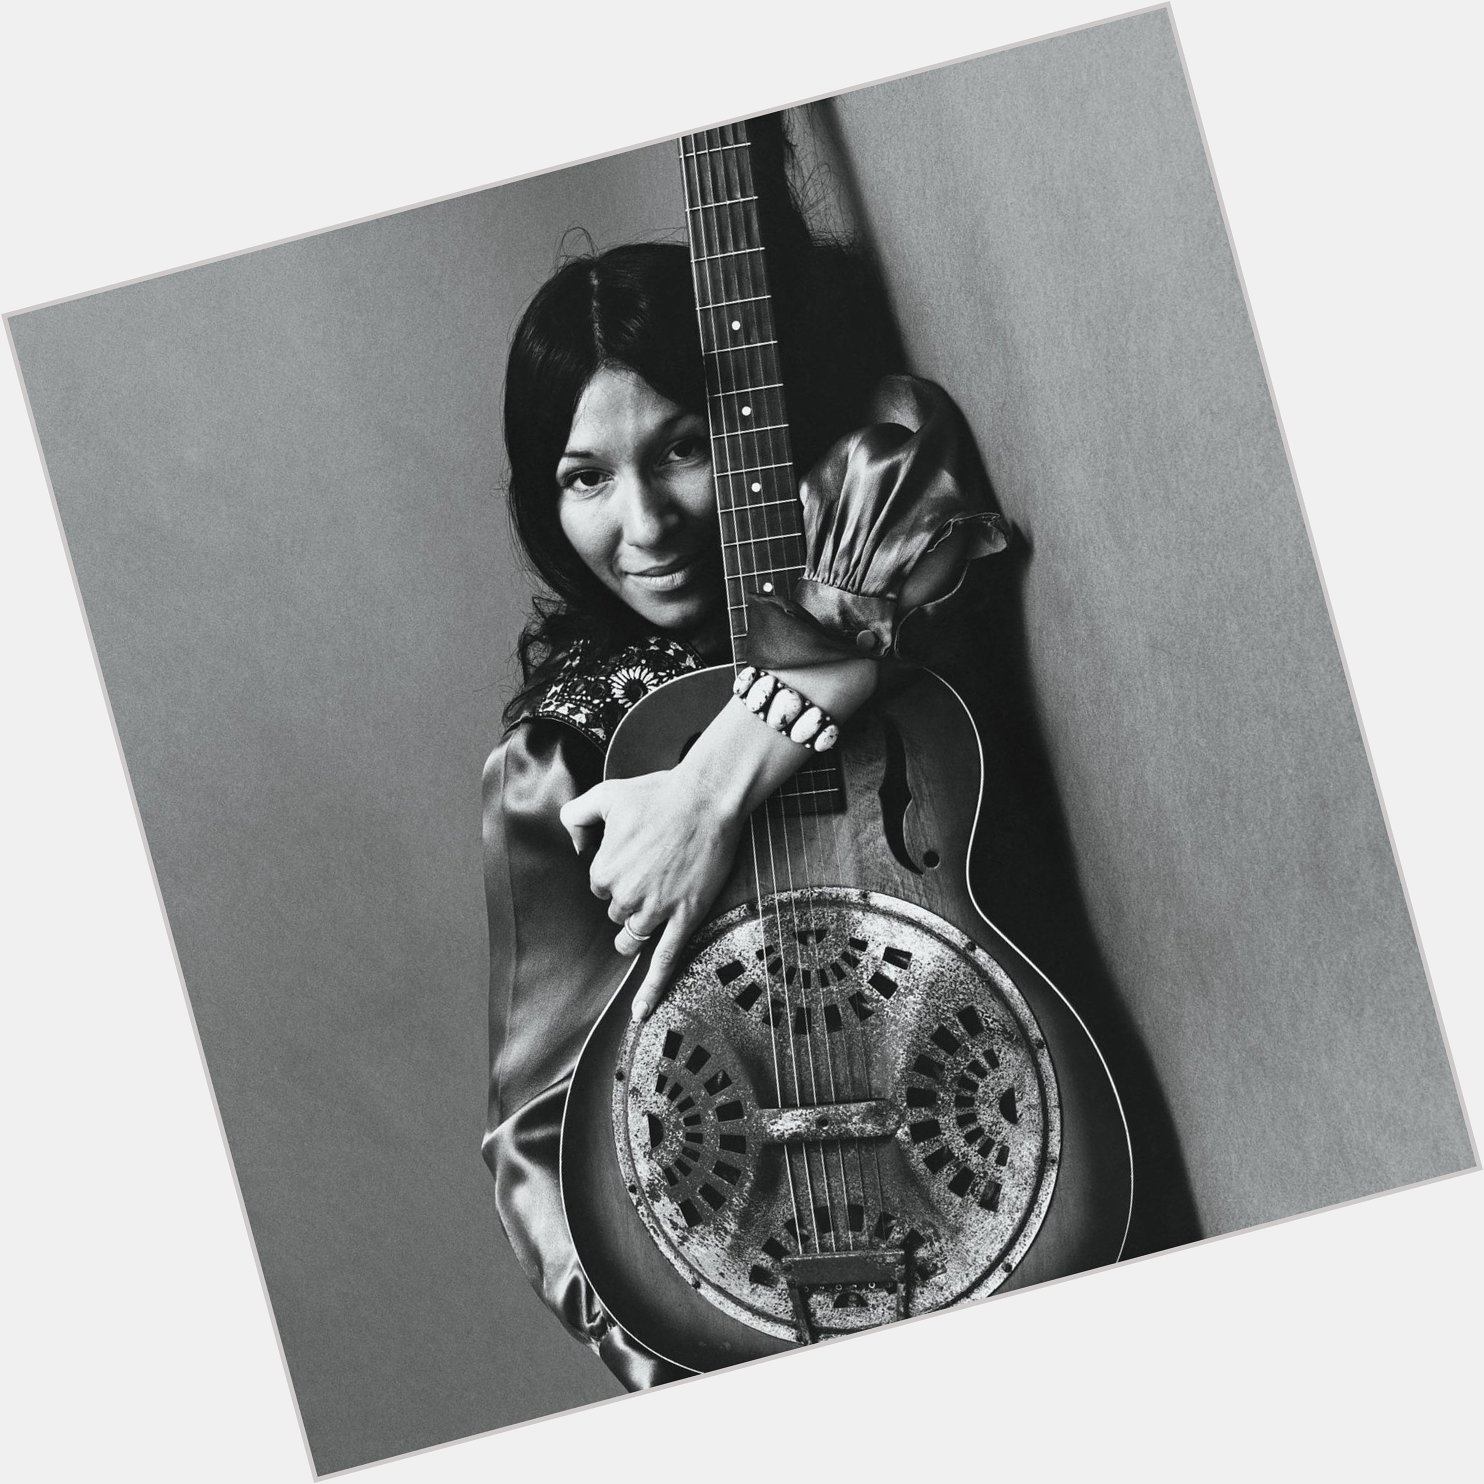 Happy Birthday to the incredible songwriter, humanitarian, artist and CSHF inductee, Buffy Sainte-Marie. 